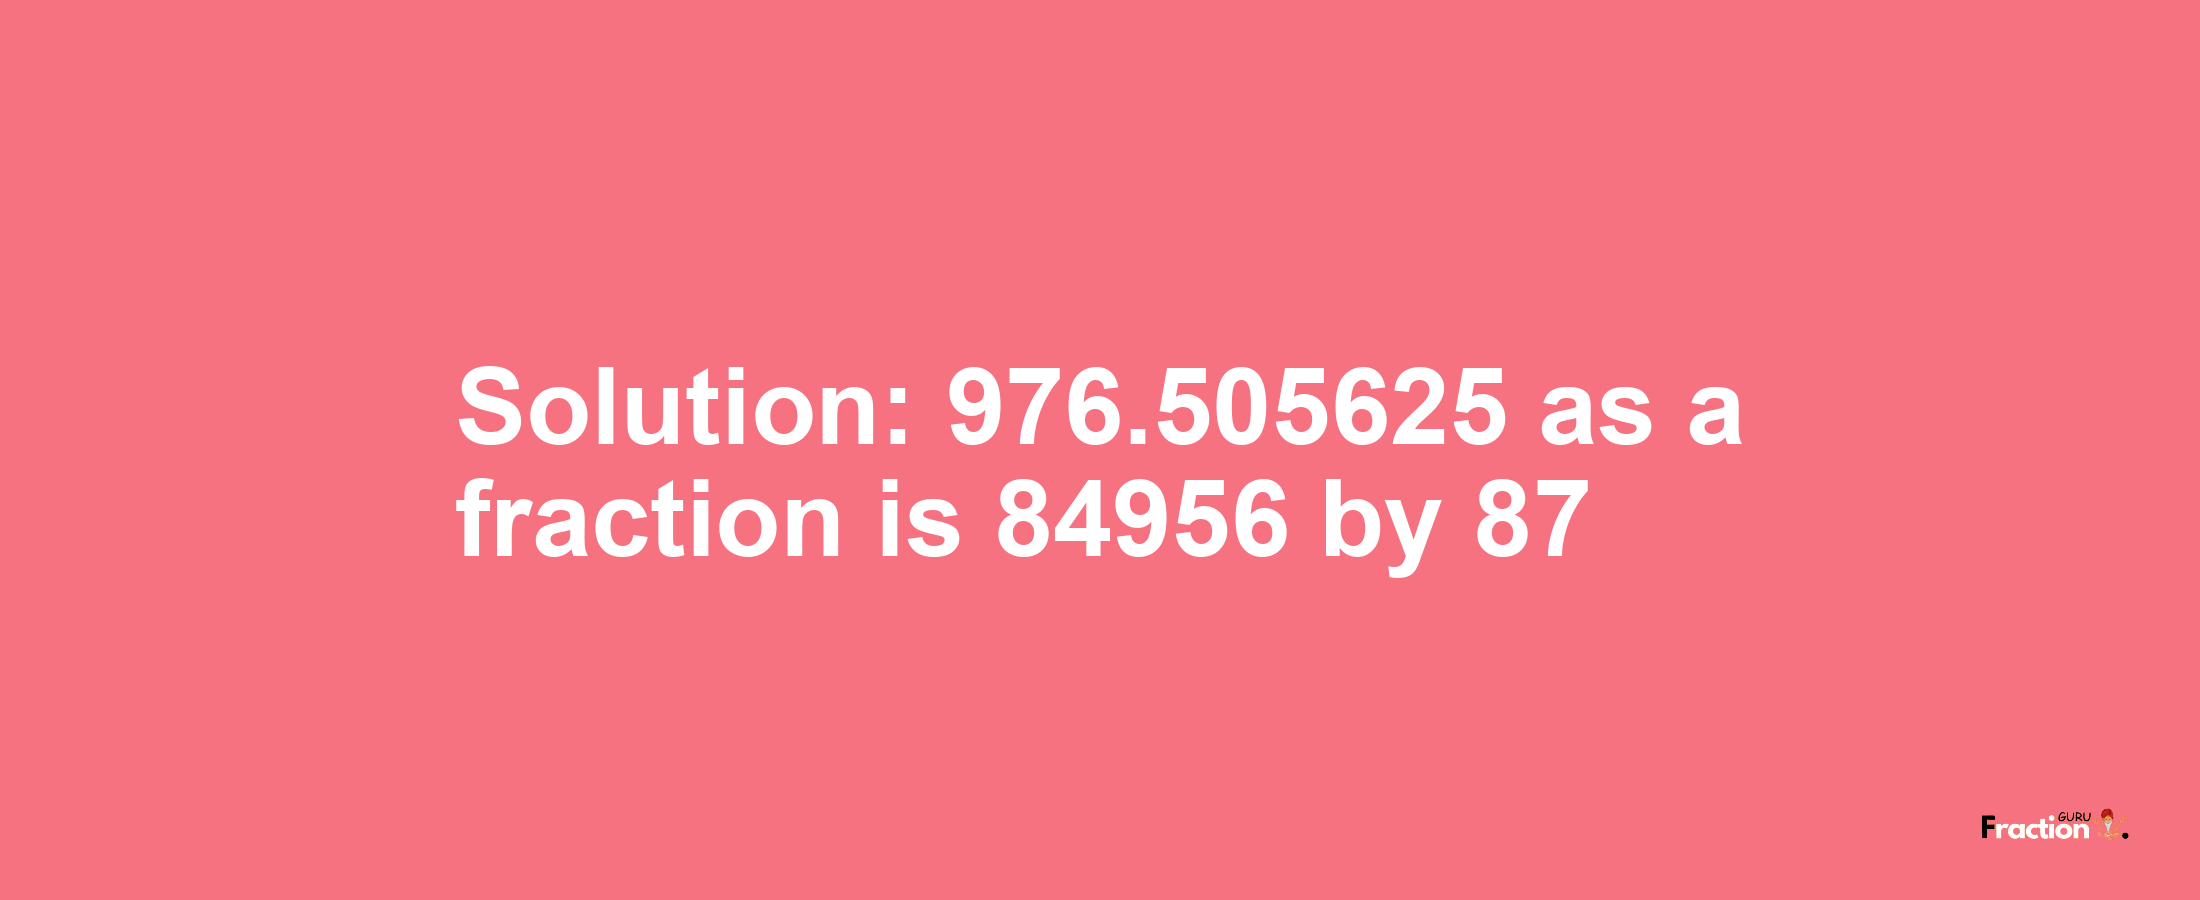 Solution:976.505625 as a fraction is 84956/87